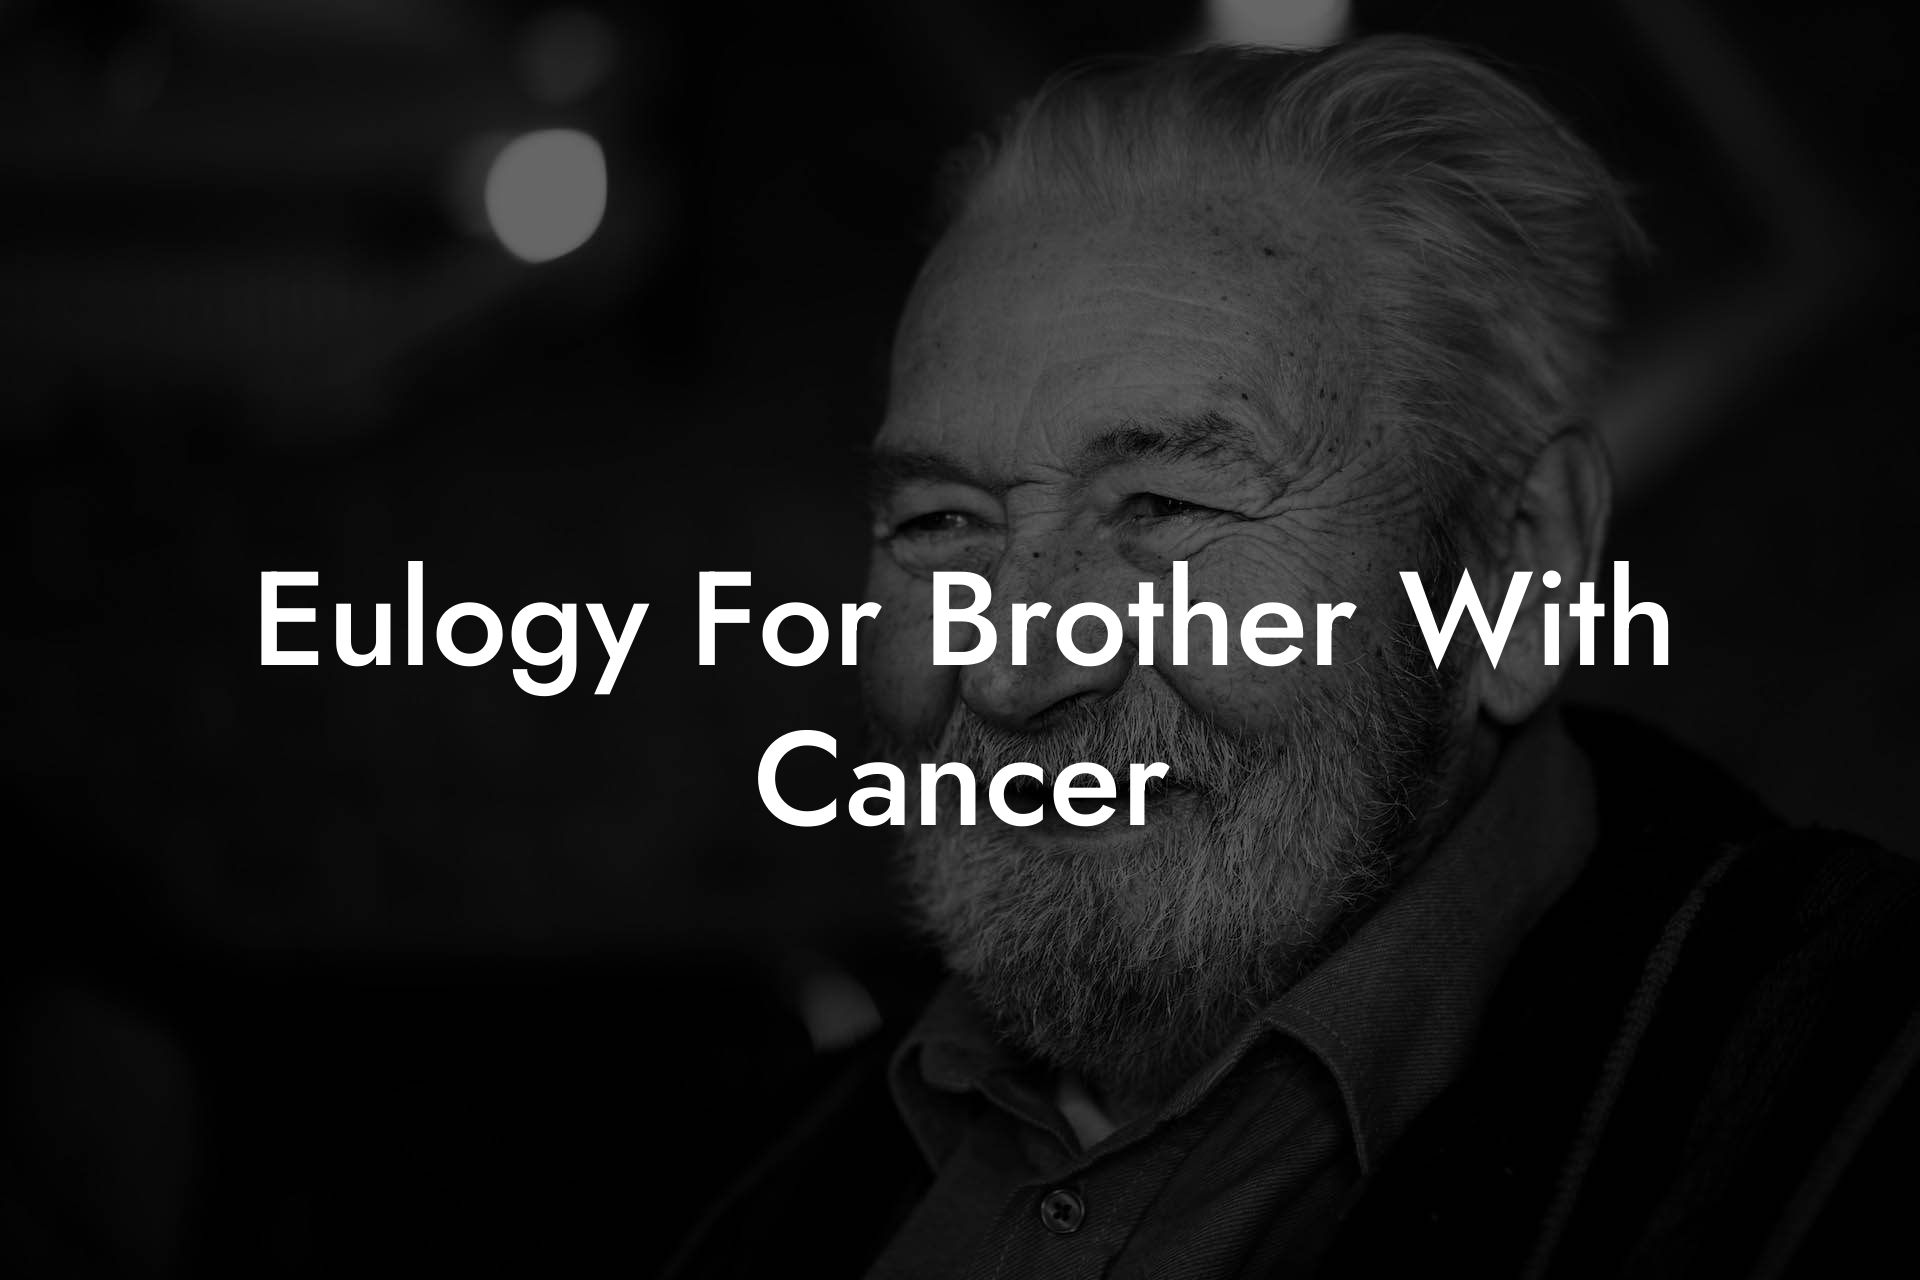 Eulogy For Brother With Cancer